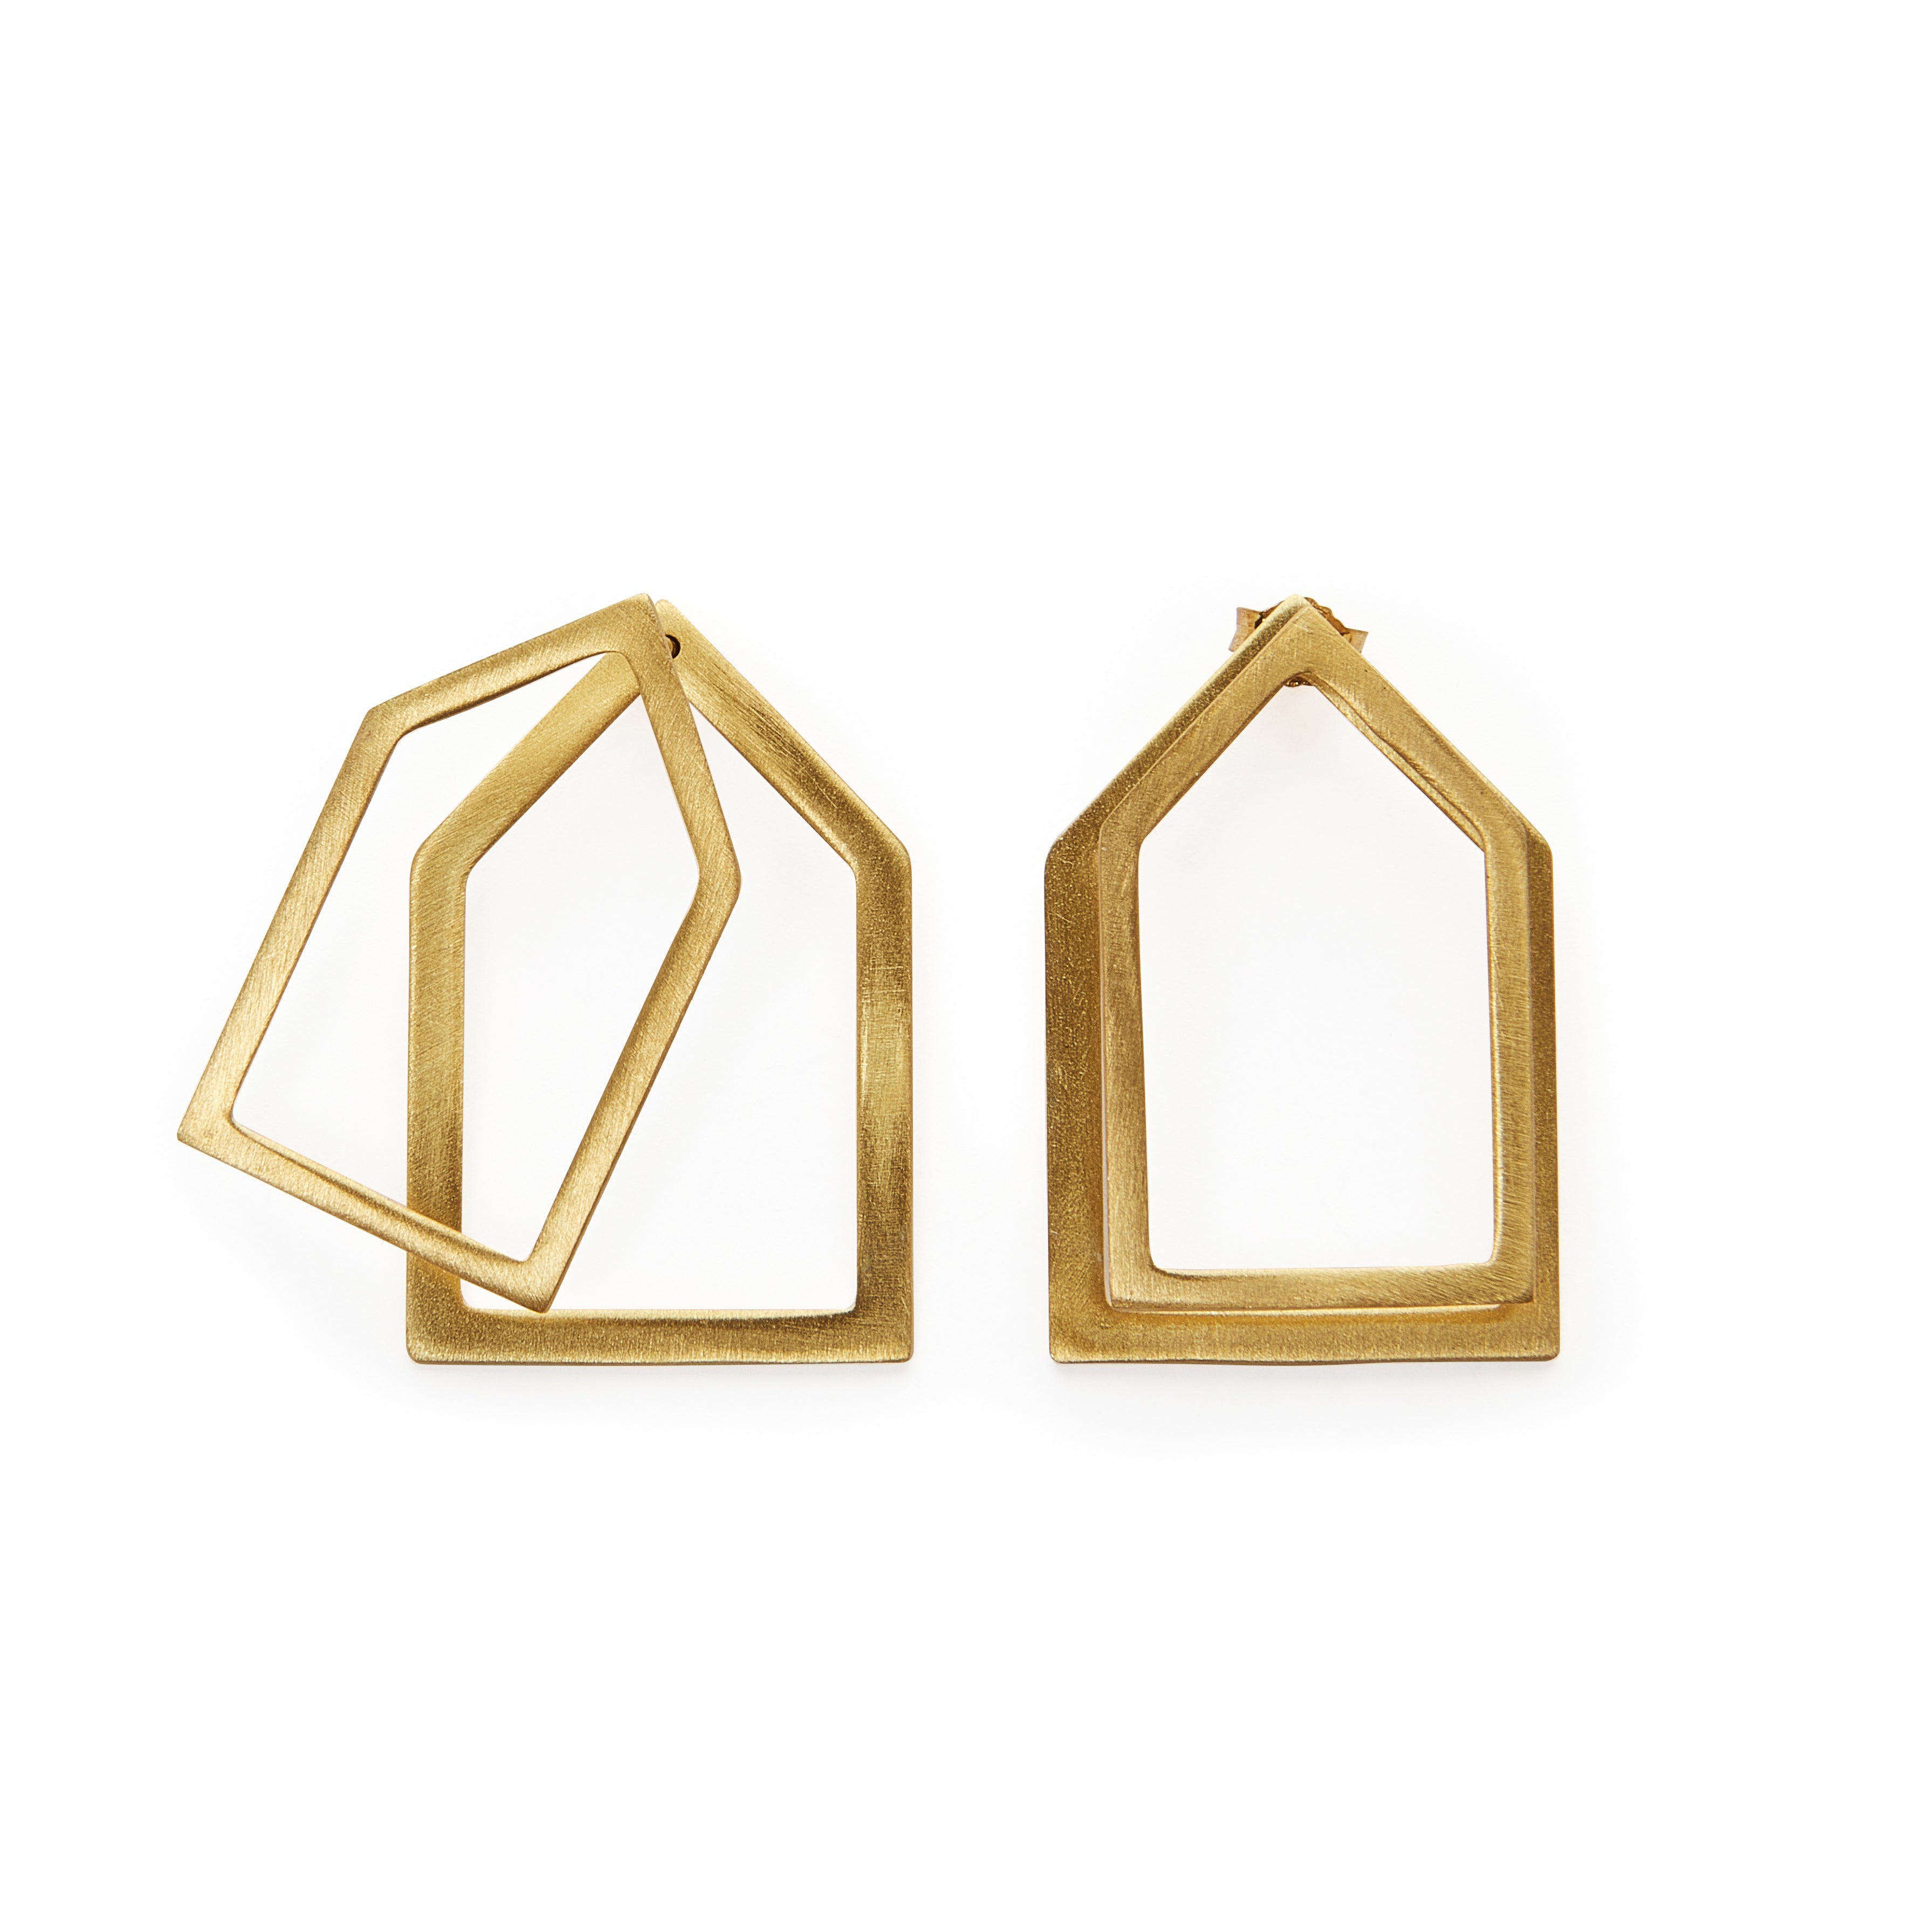 Minimal home ear jackets, comprised of two elements that can be worn together in 2 different ways, or as a single eye-catching earring. Geometric front and back earrings, made of gold-plated or platinum plated silver 925